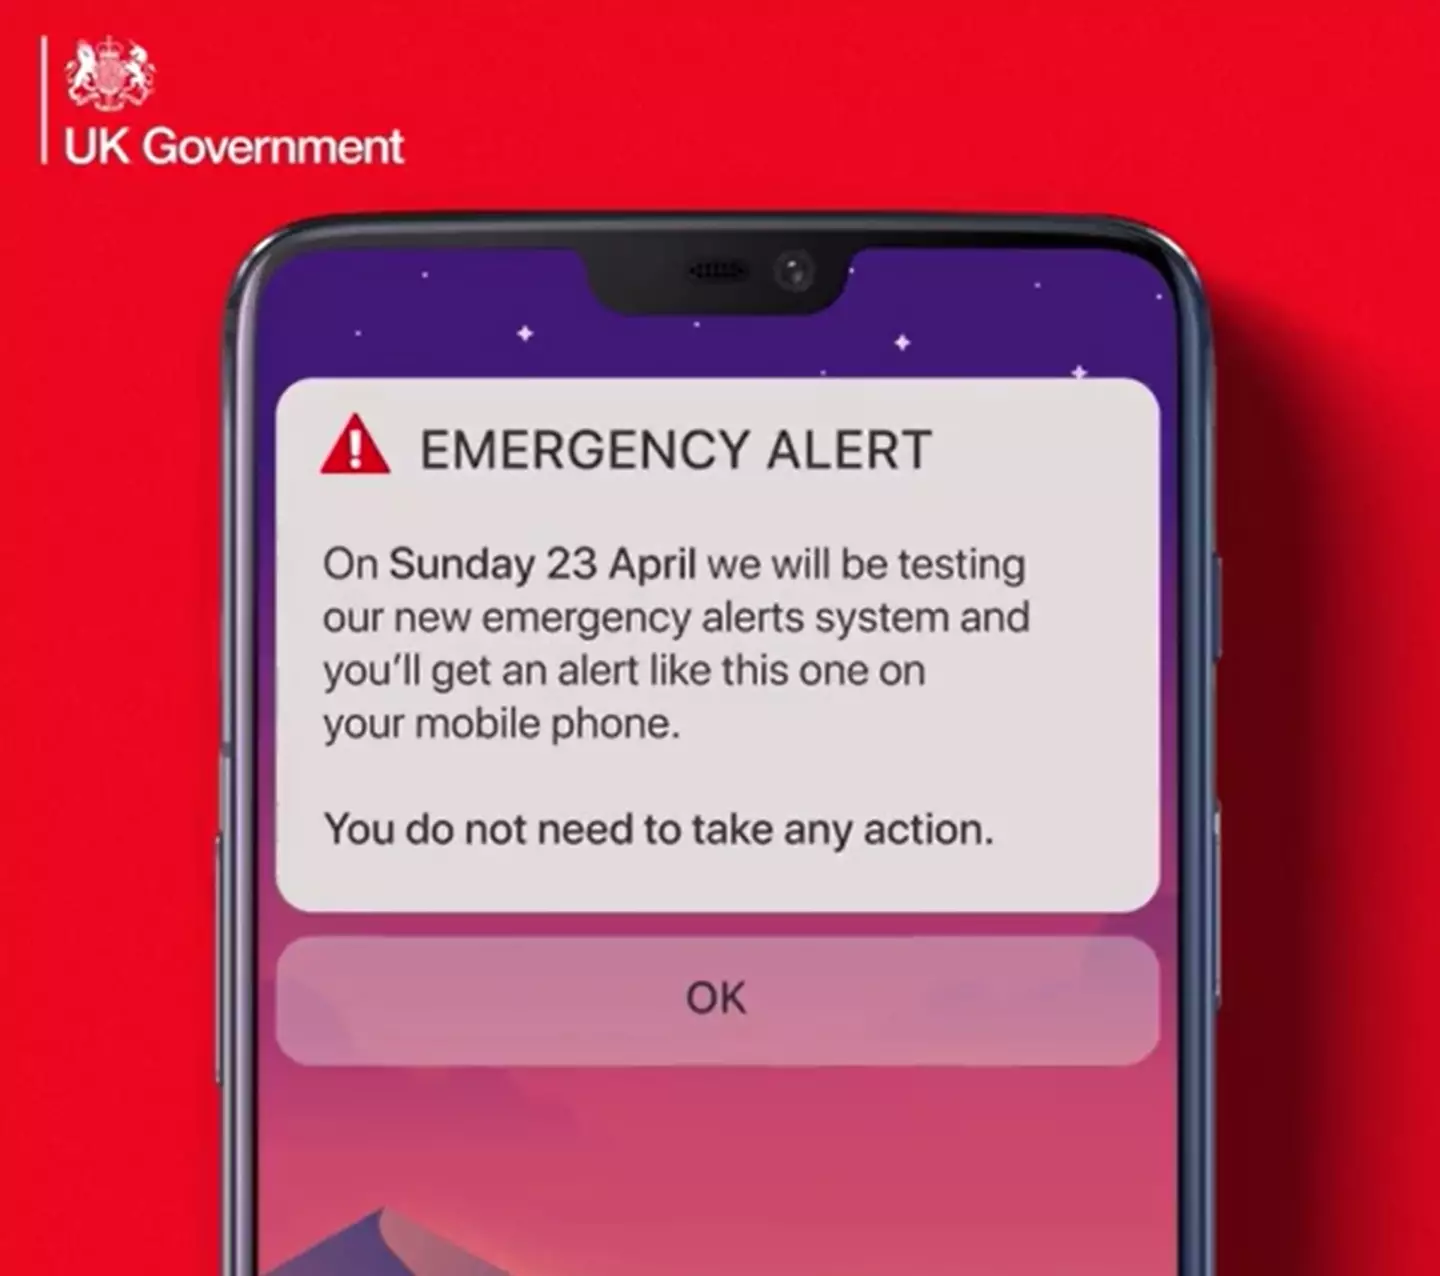 The alert is going to look like this, you don't need to do anything else.